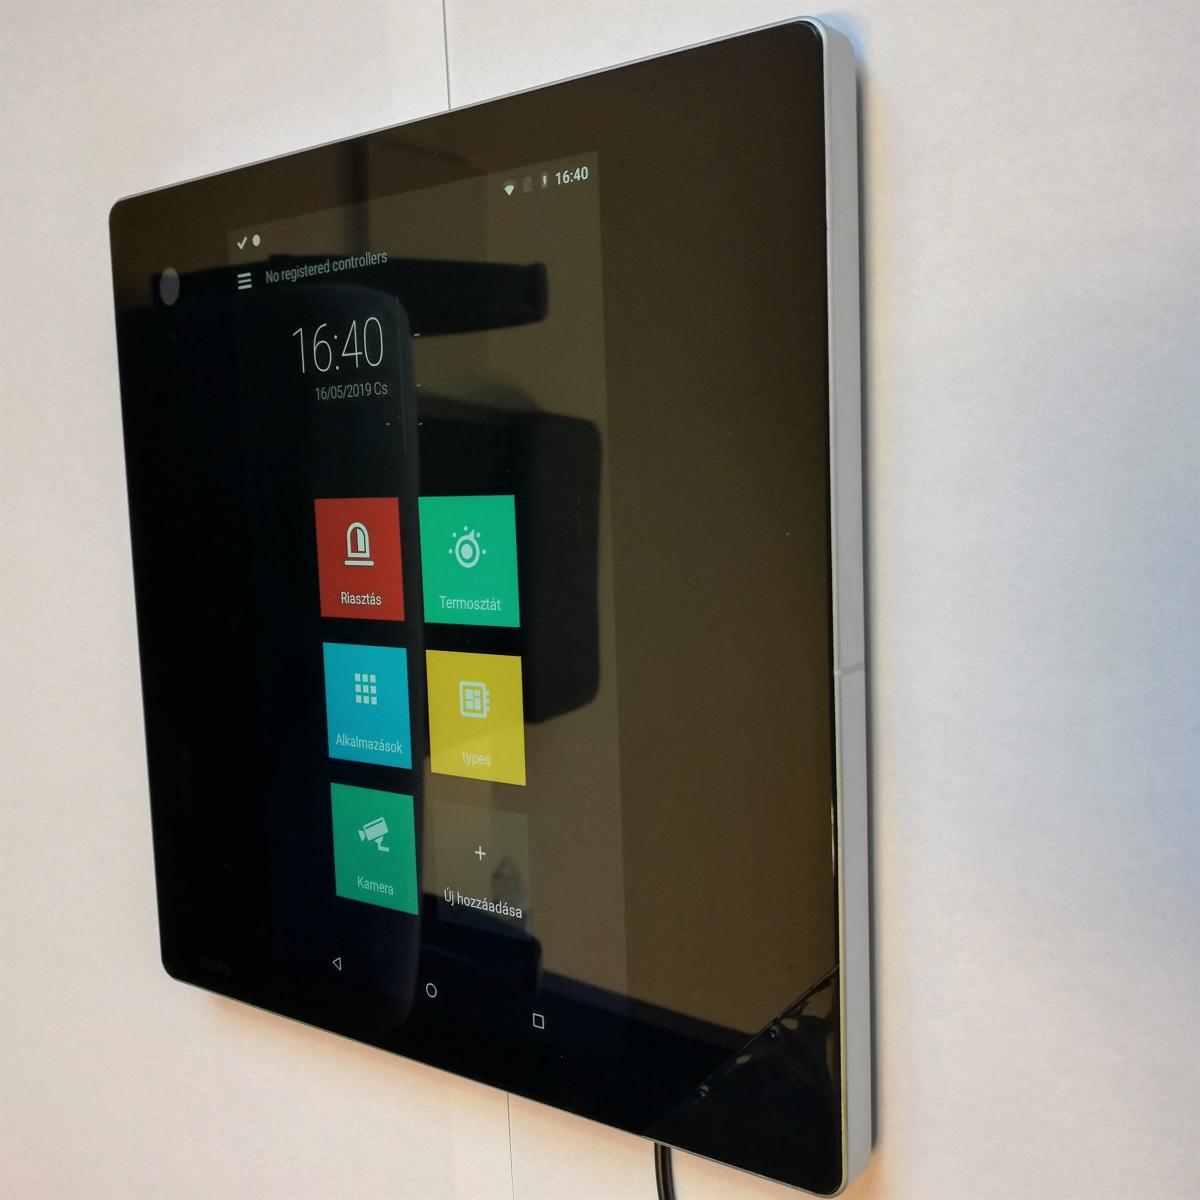 The new smart home control panel has arrived